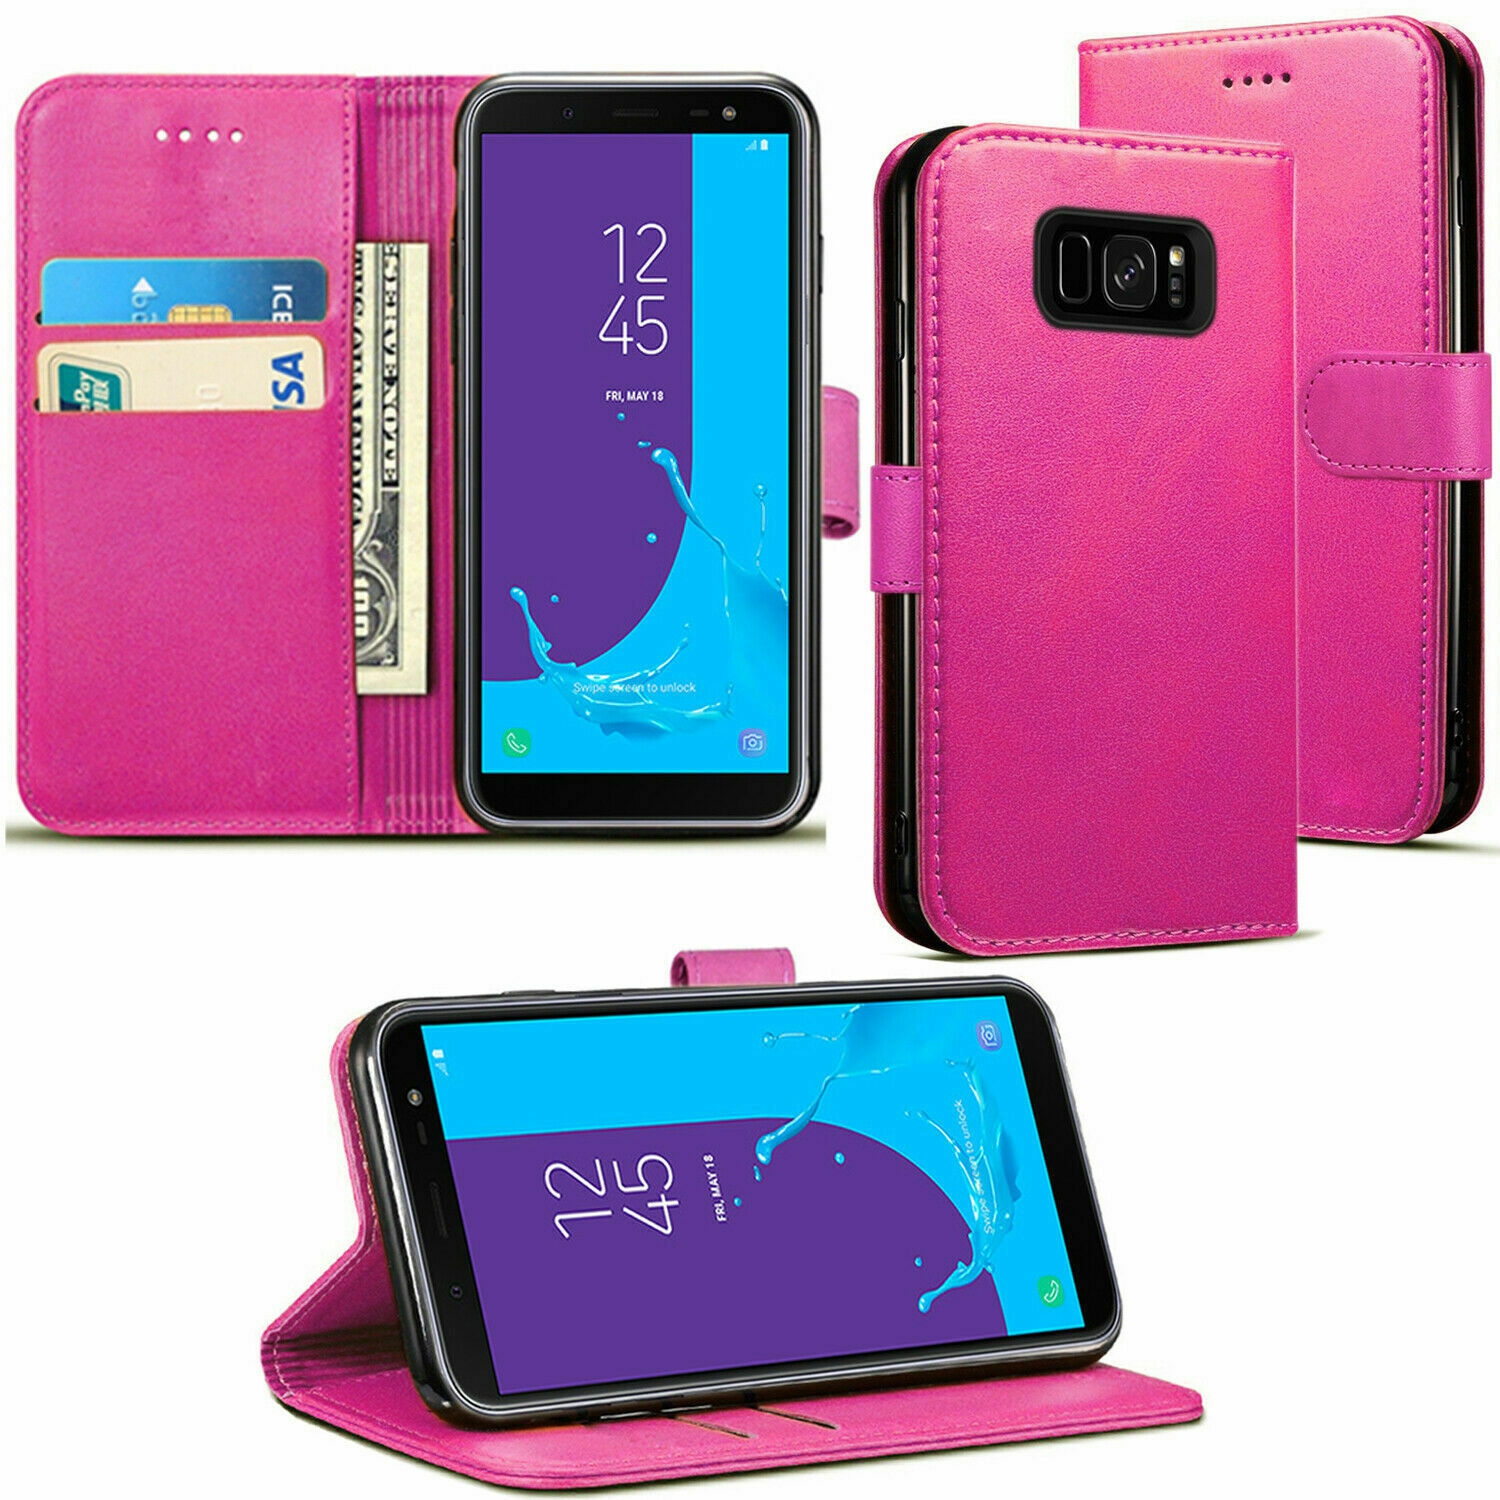 【CSmart】 Magnetic Card Slot Leather Folio Wallet Flip Case Cover for Samsung Galaxy S7 Edge, Hot Pink